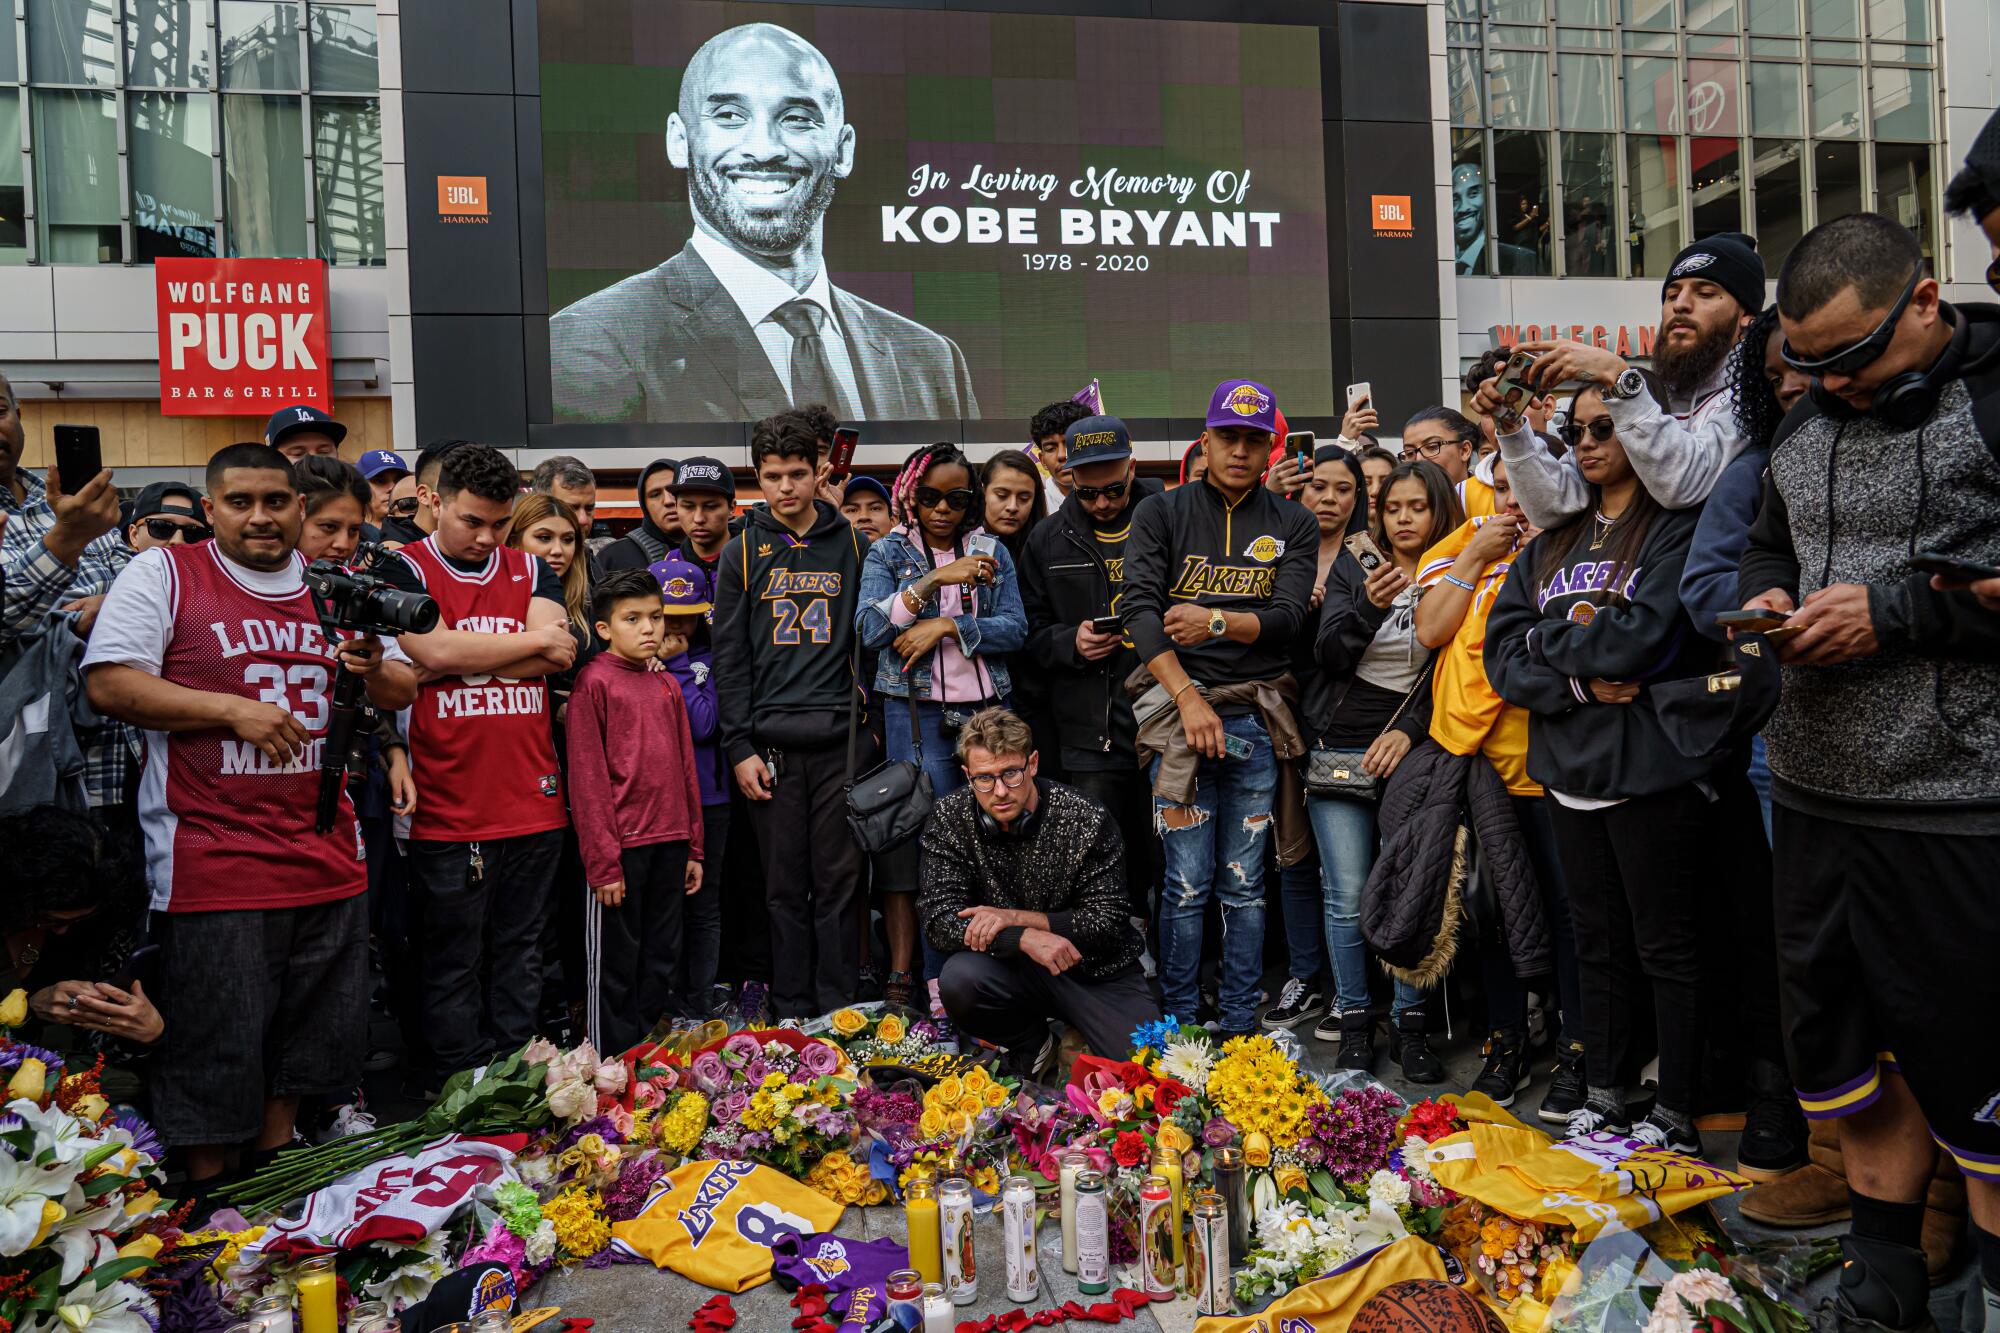 Fans gather in front of a screen with Kobe Bryant's image. On the ground is a memorial with candles, flowers and jerseys.